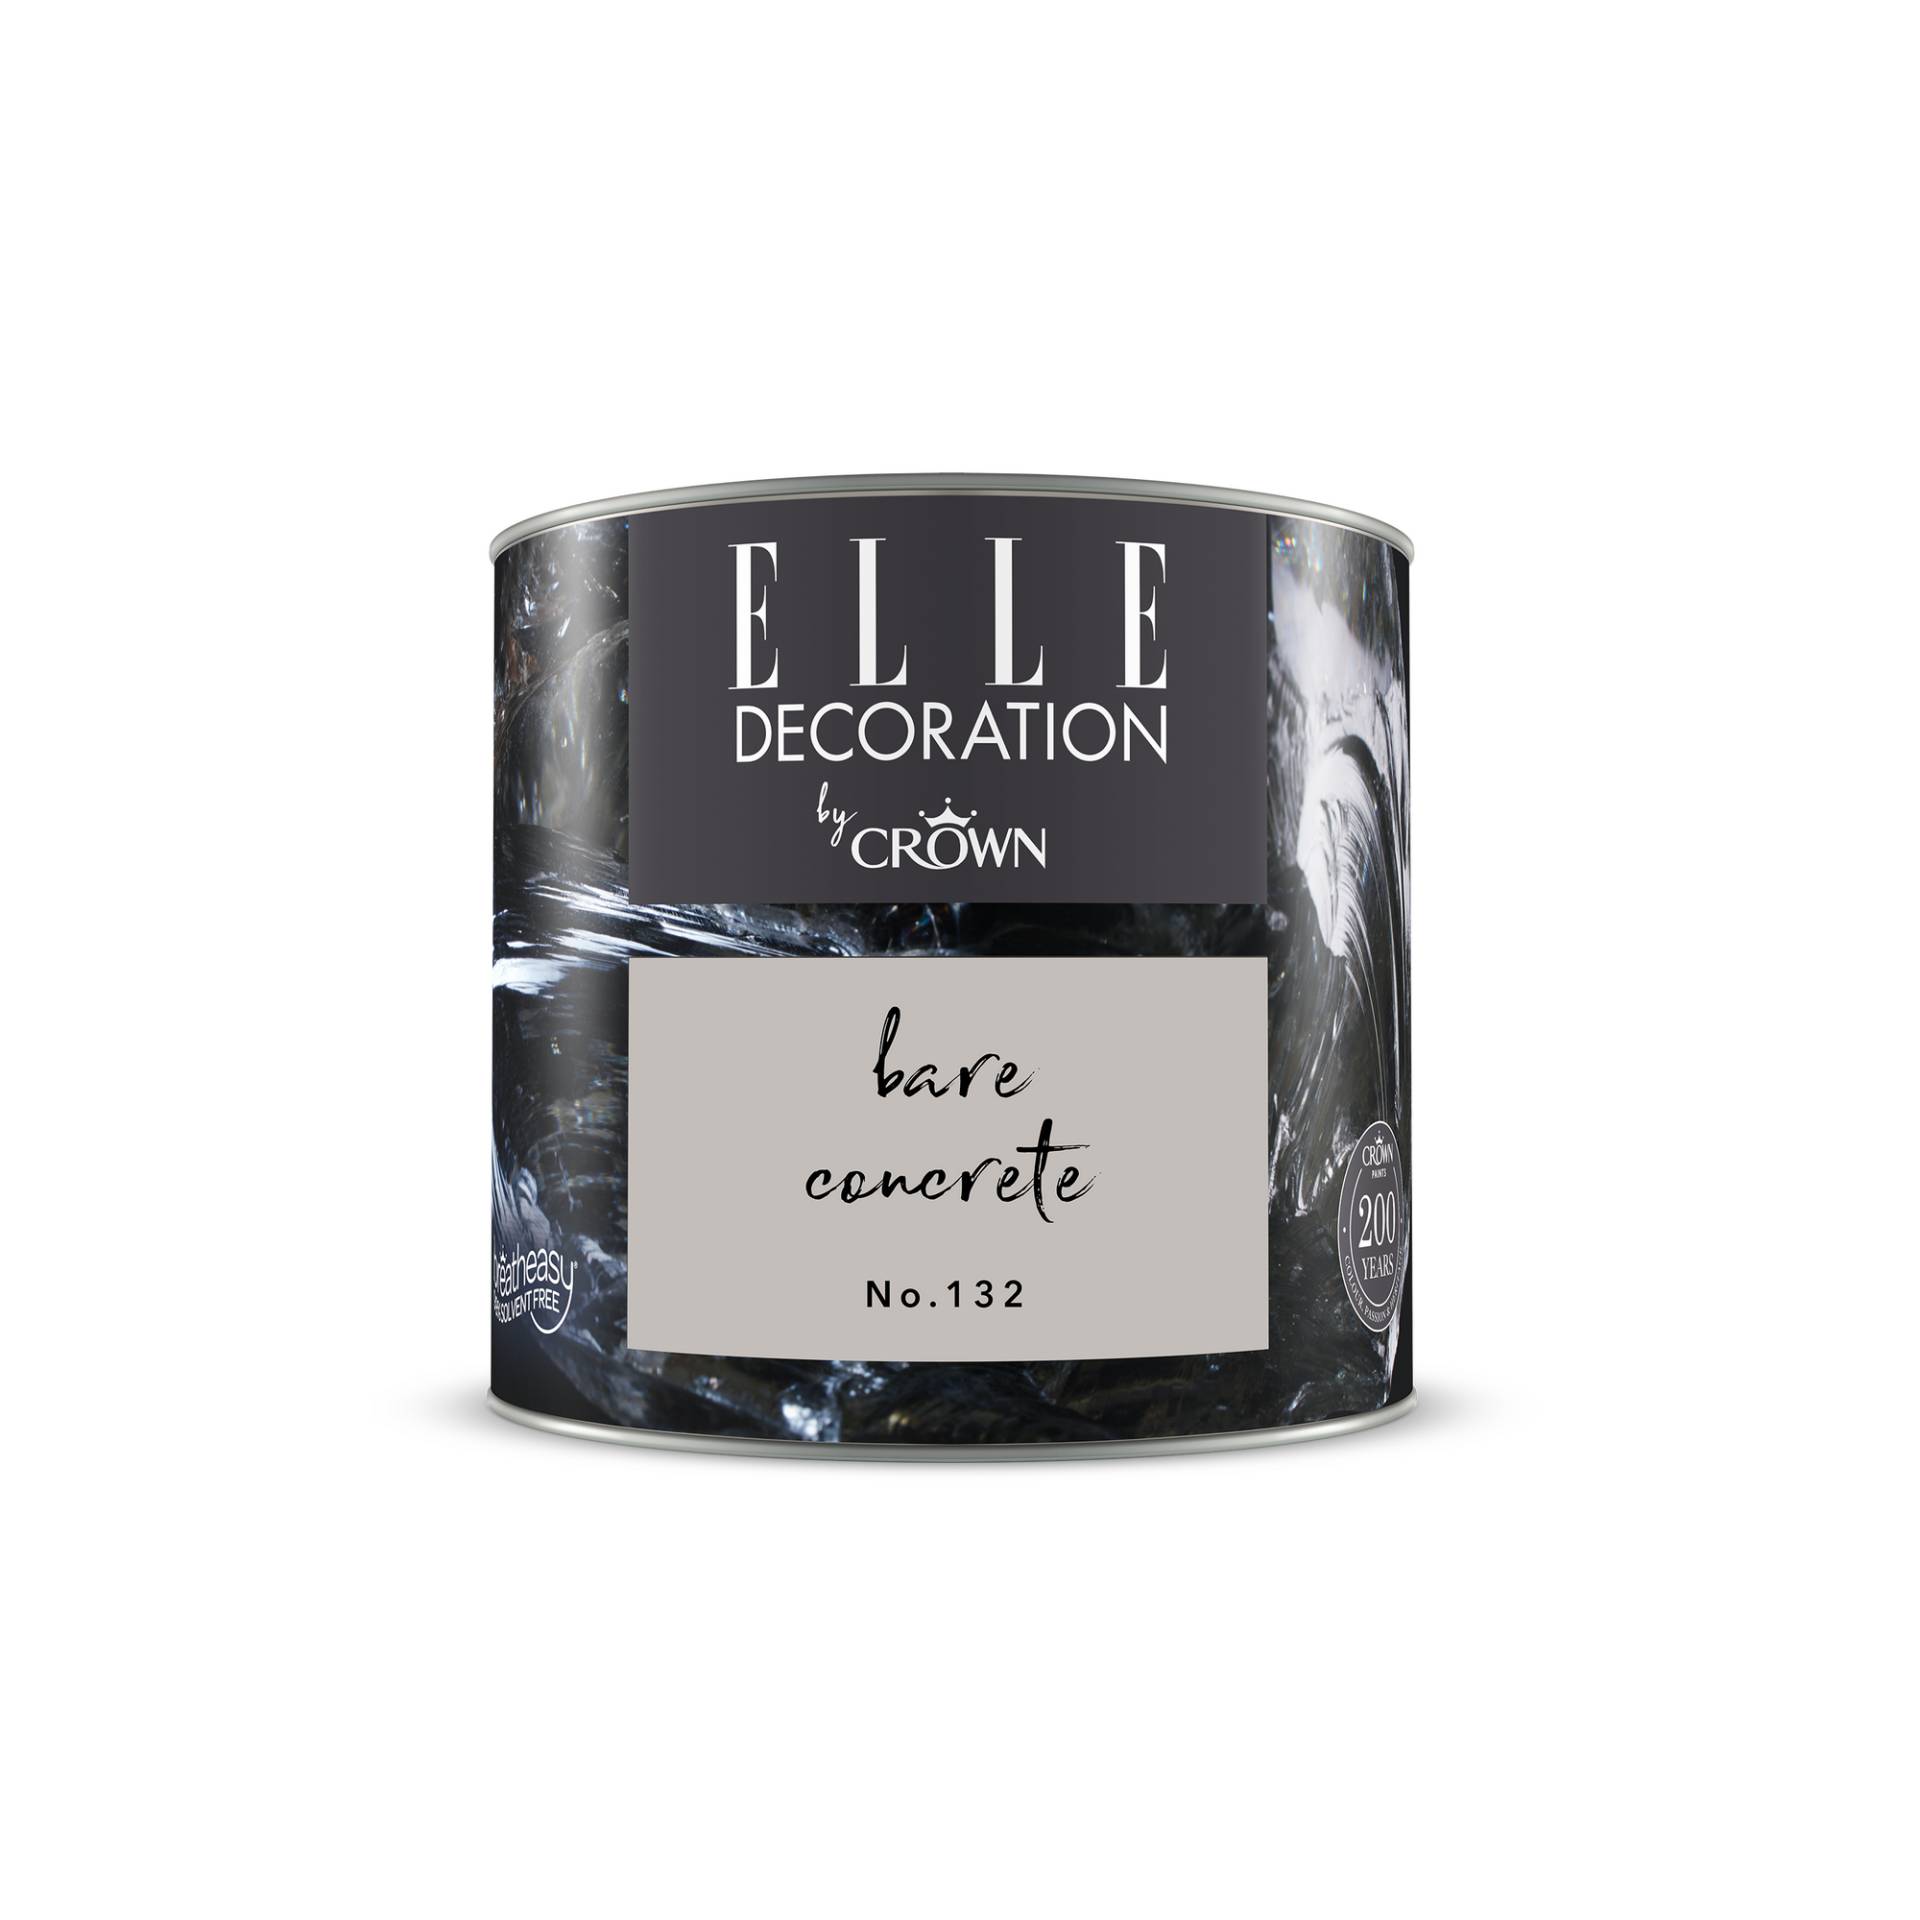 ELLE Decoration by Crown Wandfarbe 'Bare Concrete No. 132' grau matt 125 ml von ELLE Decoration by Crown